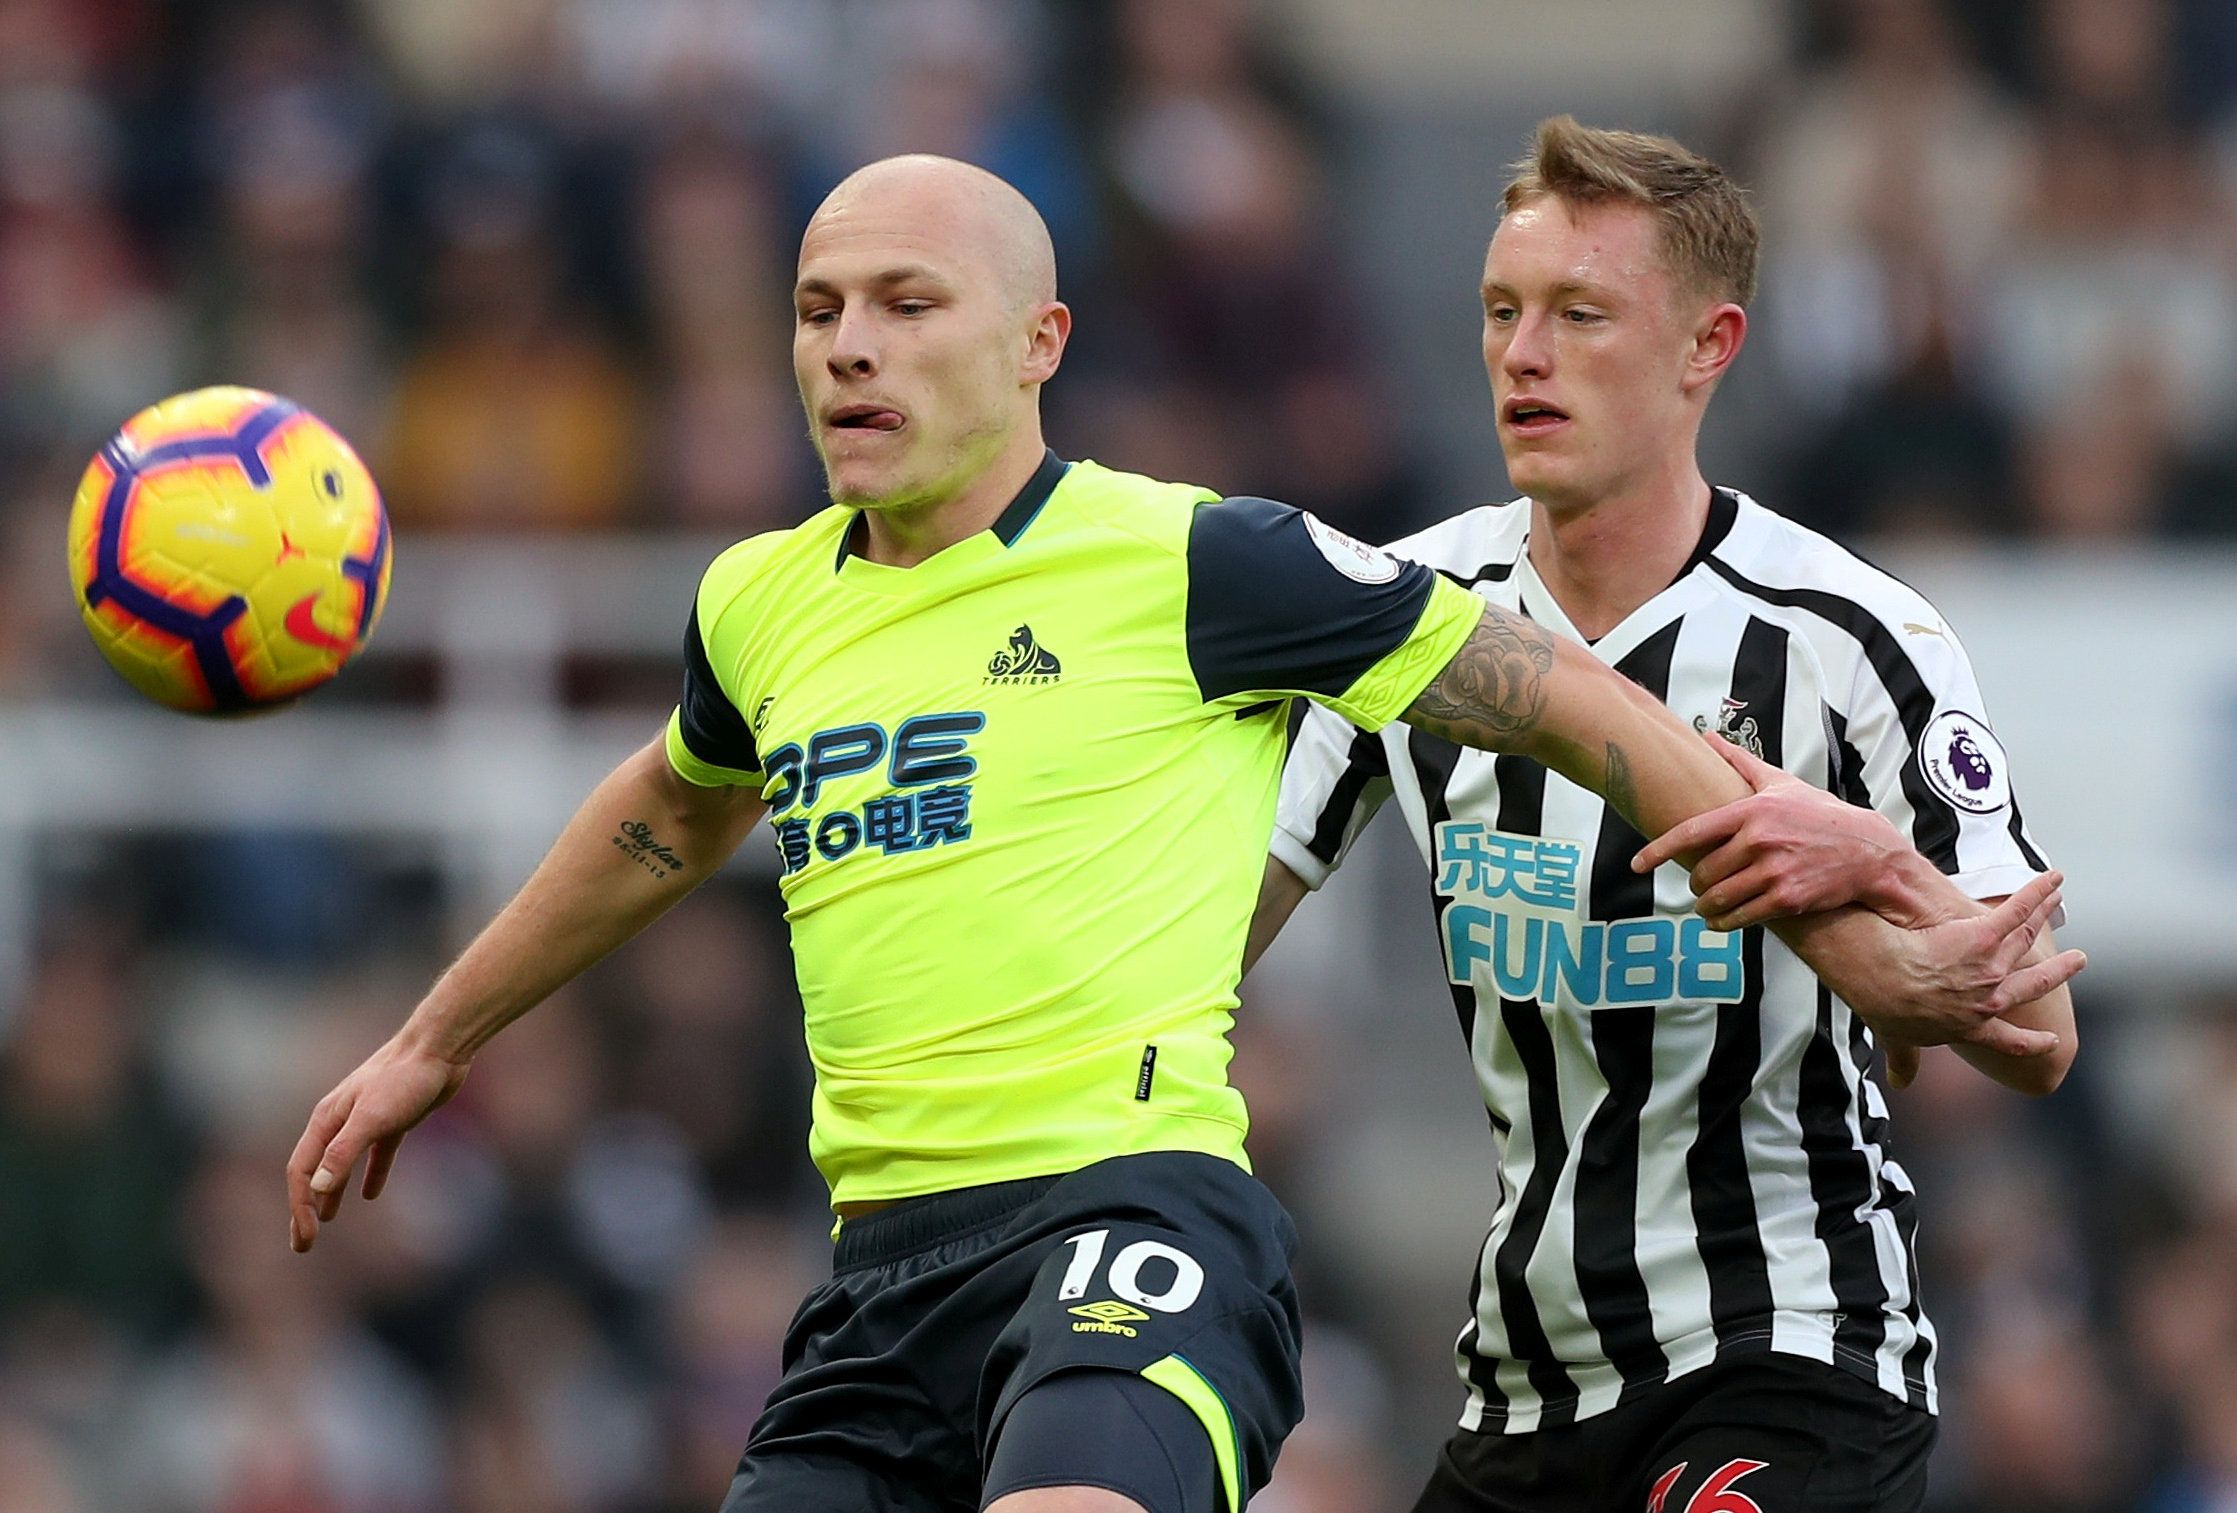 Soccer Football - Premier League - Newcastle United v Huddersfield Town - St James' Park, Newcastle, Britain - February 23, 2019  Huddersfield Town's Aaron Mooy in action with Newcastle United's Sean Longstaff    Action Images via Reuters/Lee Smith  EDITORIAL USE ONLY. No use with unauthorized audio, video, data, fixture lists, club/league logos or 